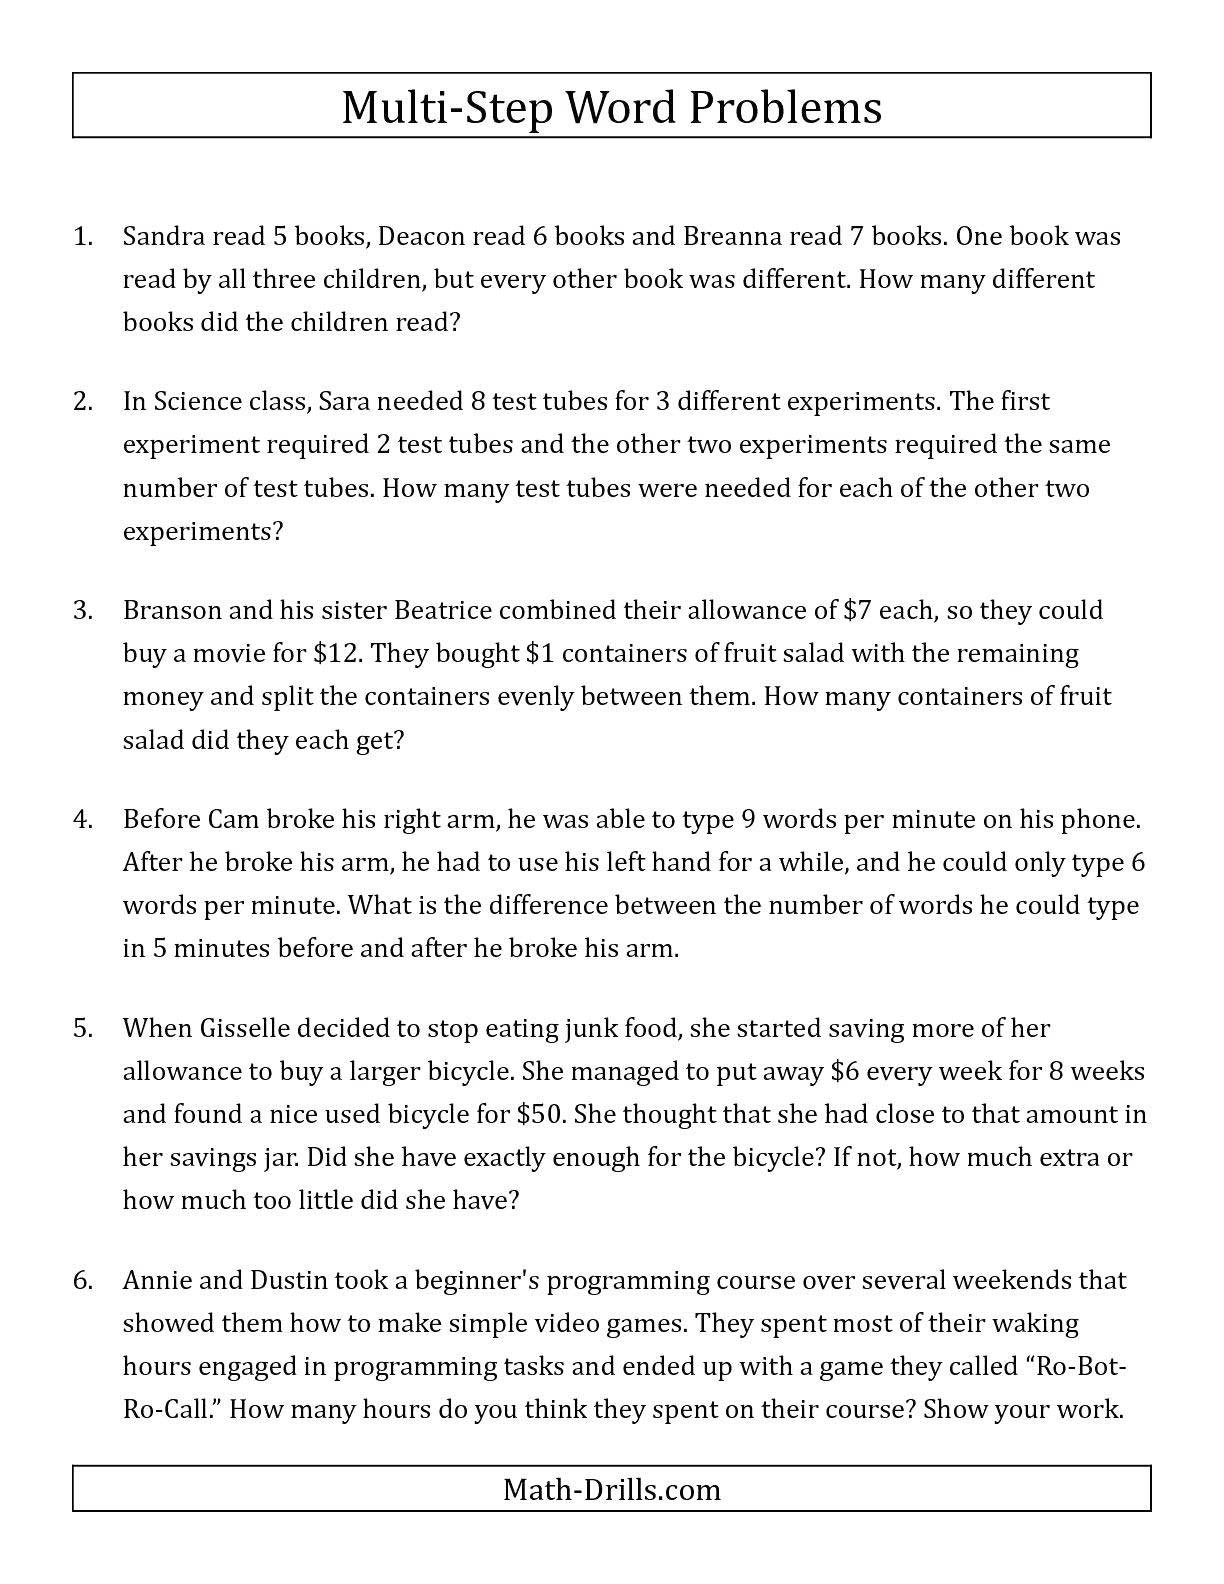 one step equation word problems worksheet amusing algebra and geometry math problems about solving multi step equations word problems worksheet sys